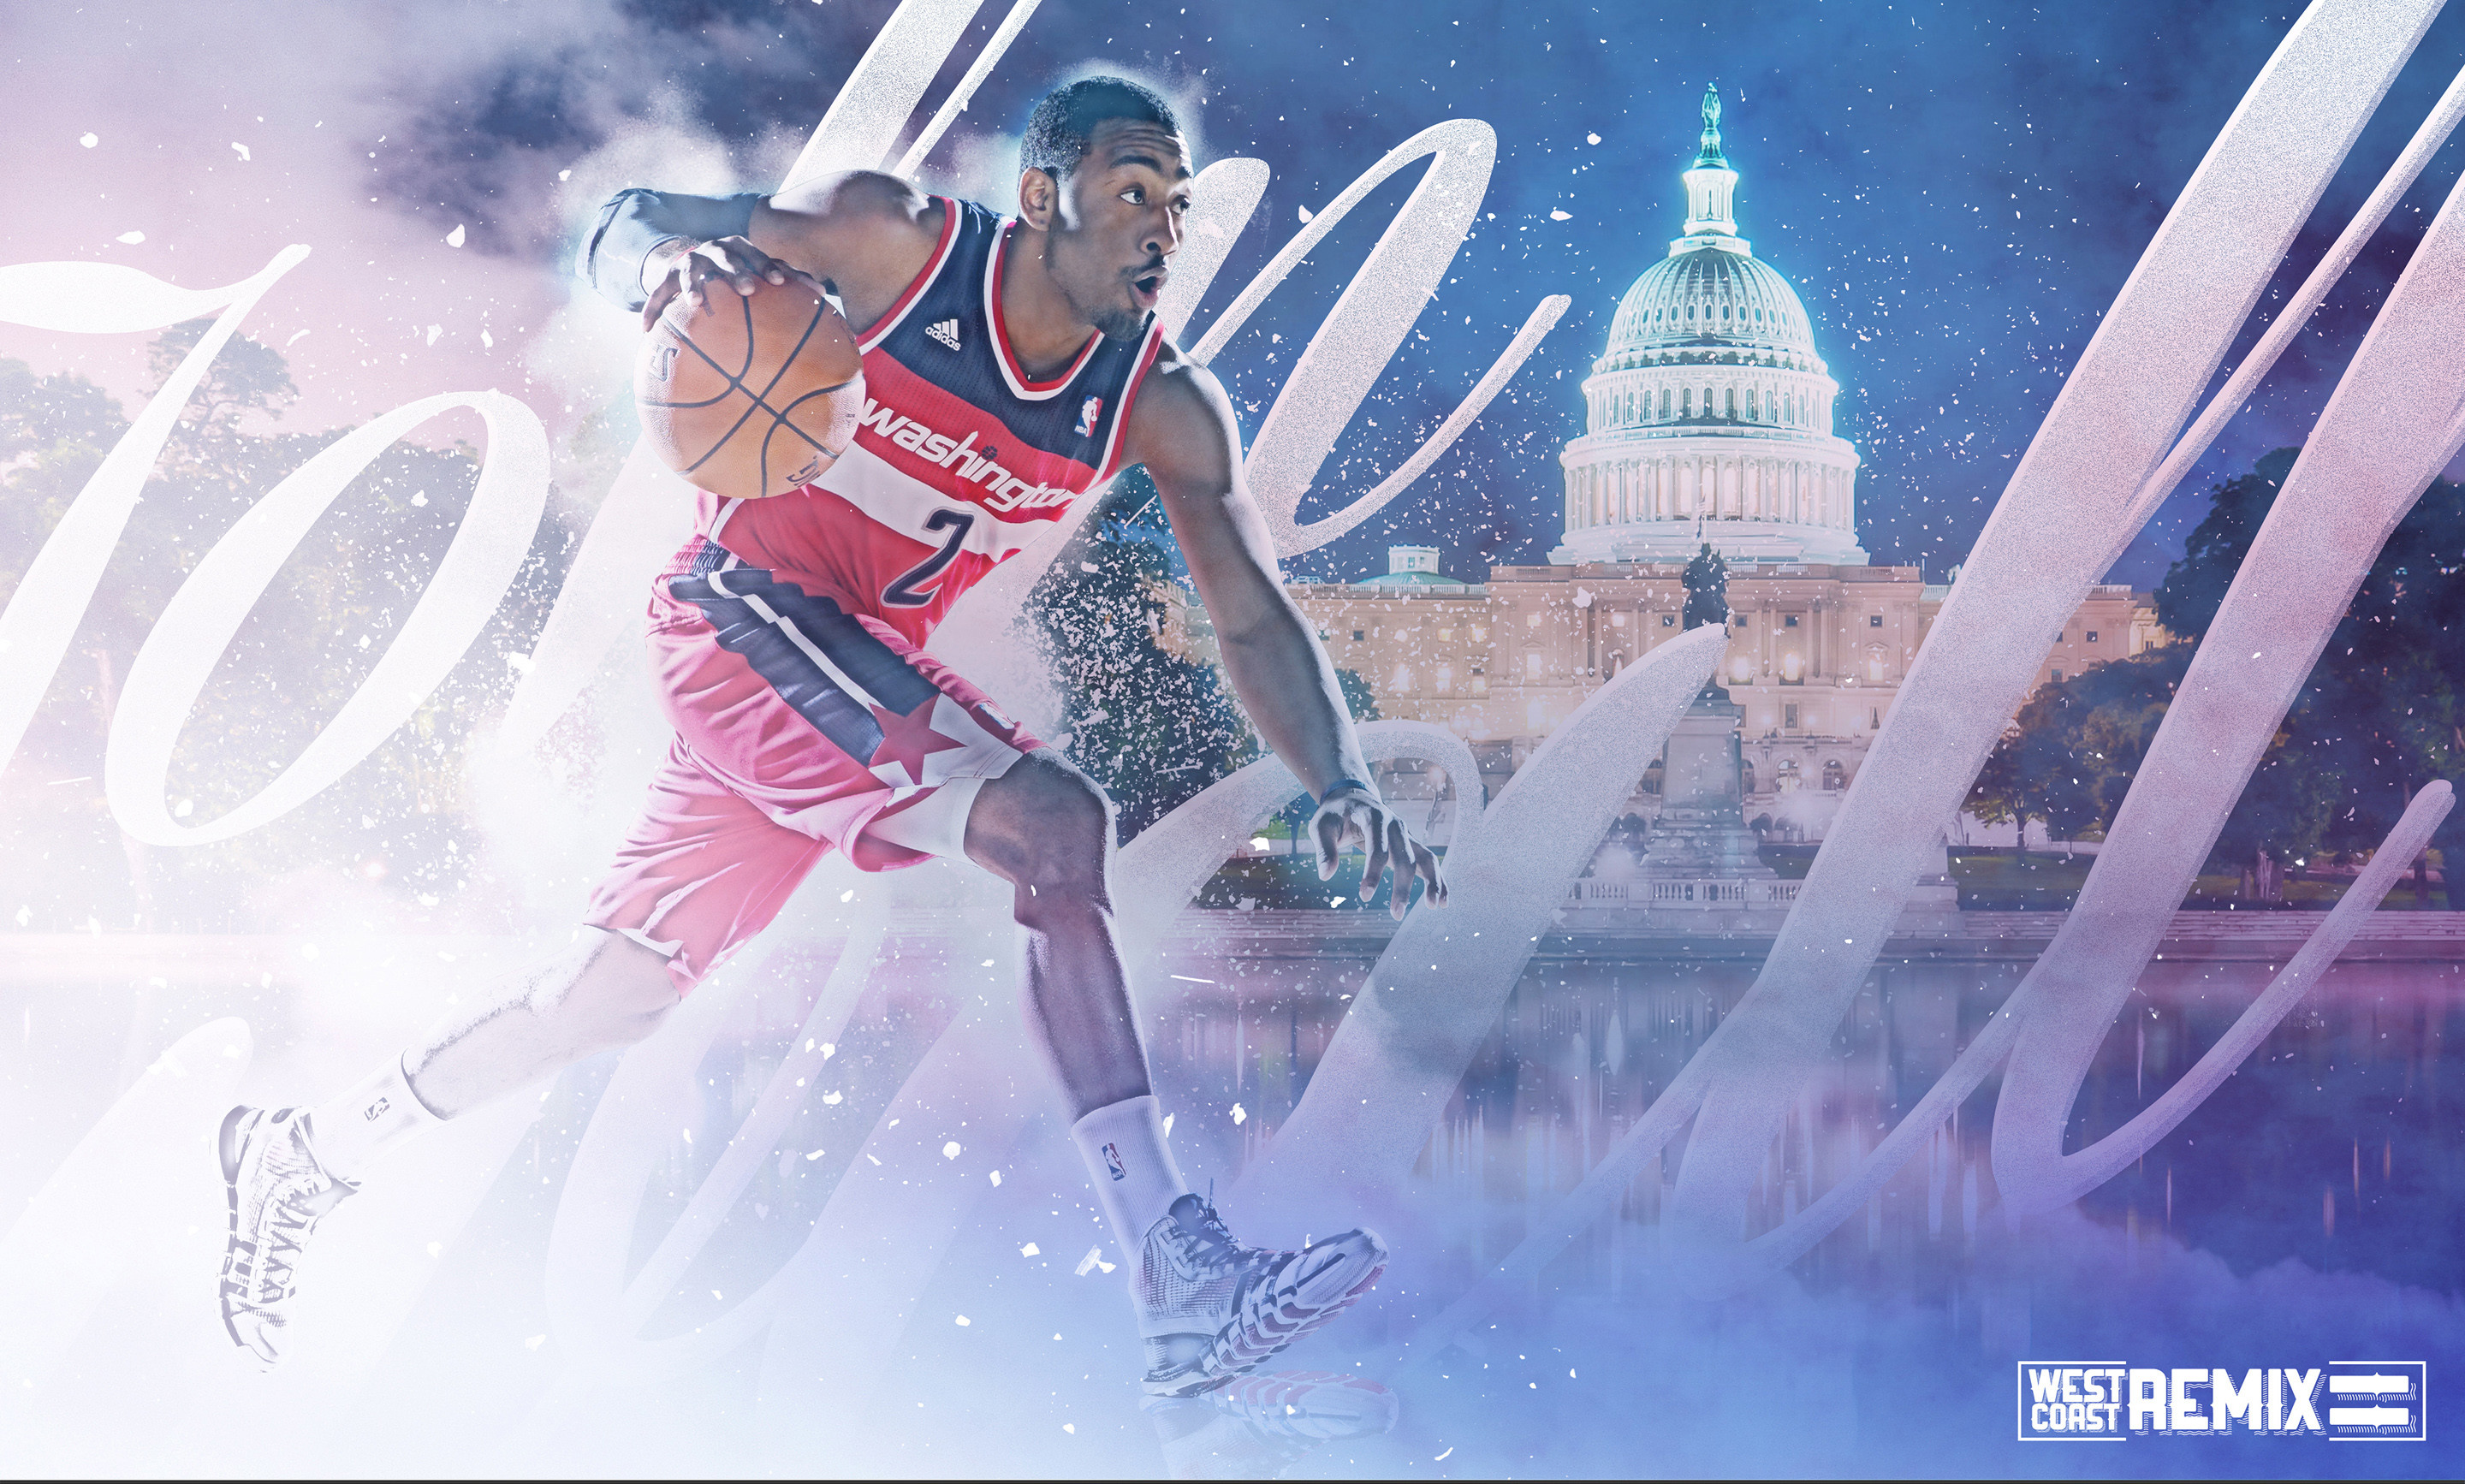 2880x1734 john wall backgrounds desktop hd free amazing cool background images mac  windows 10 tablet 